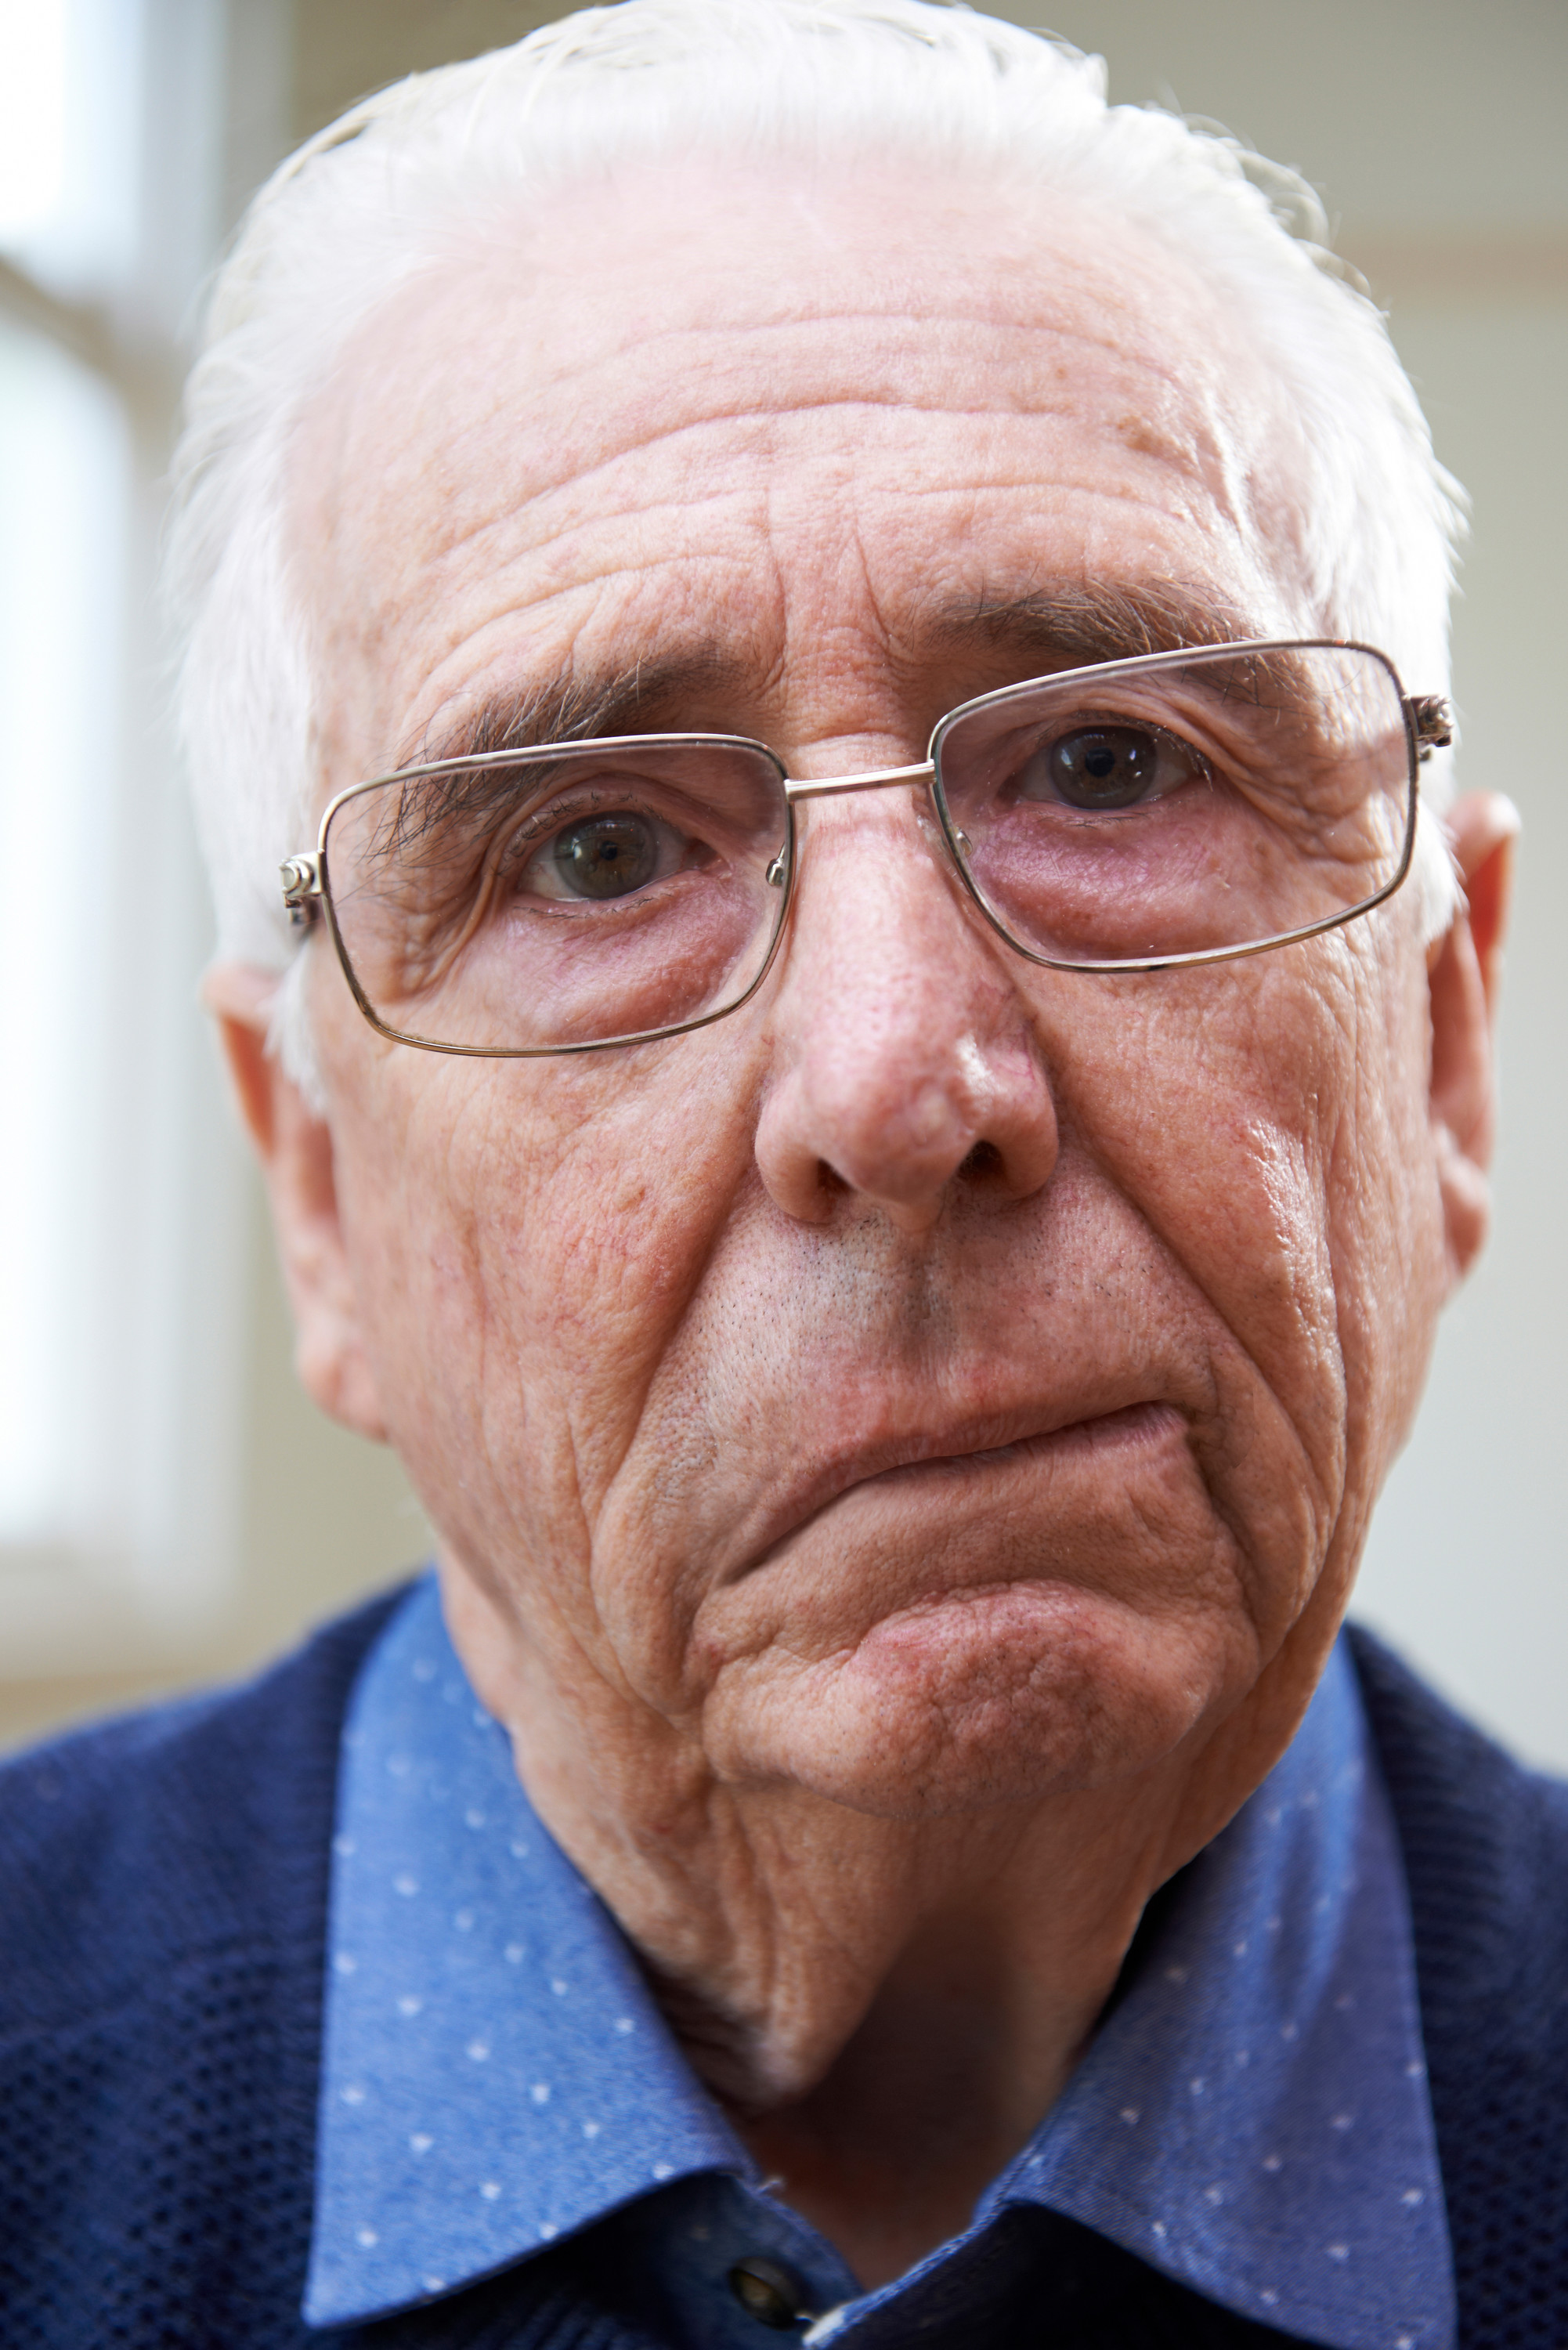 A close up of an older man. The muscles in his face are weak on one side